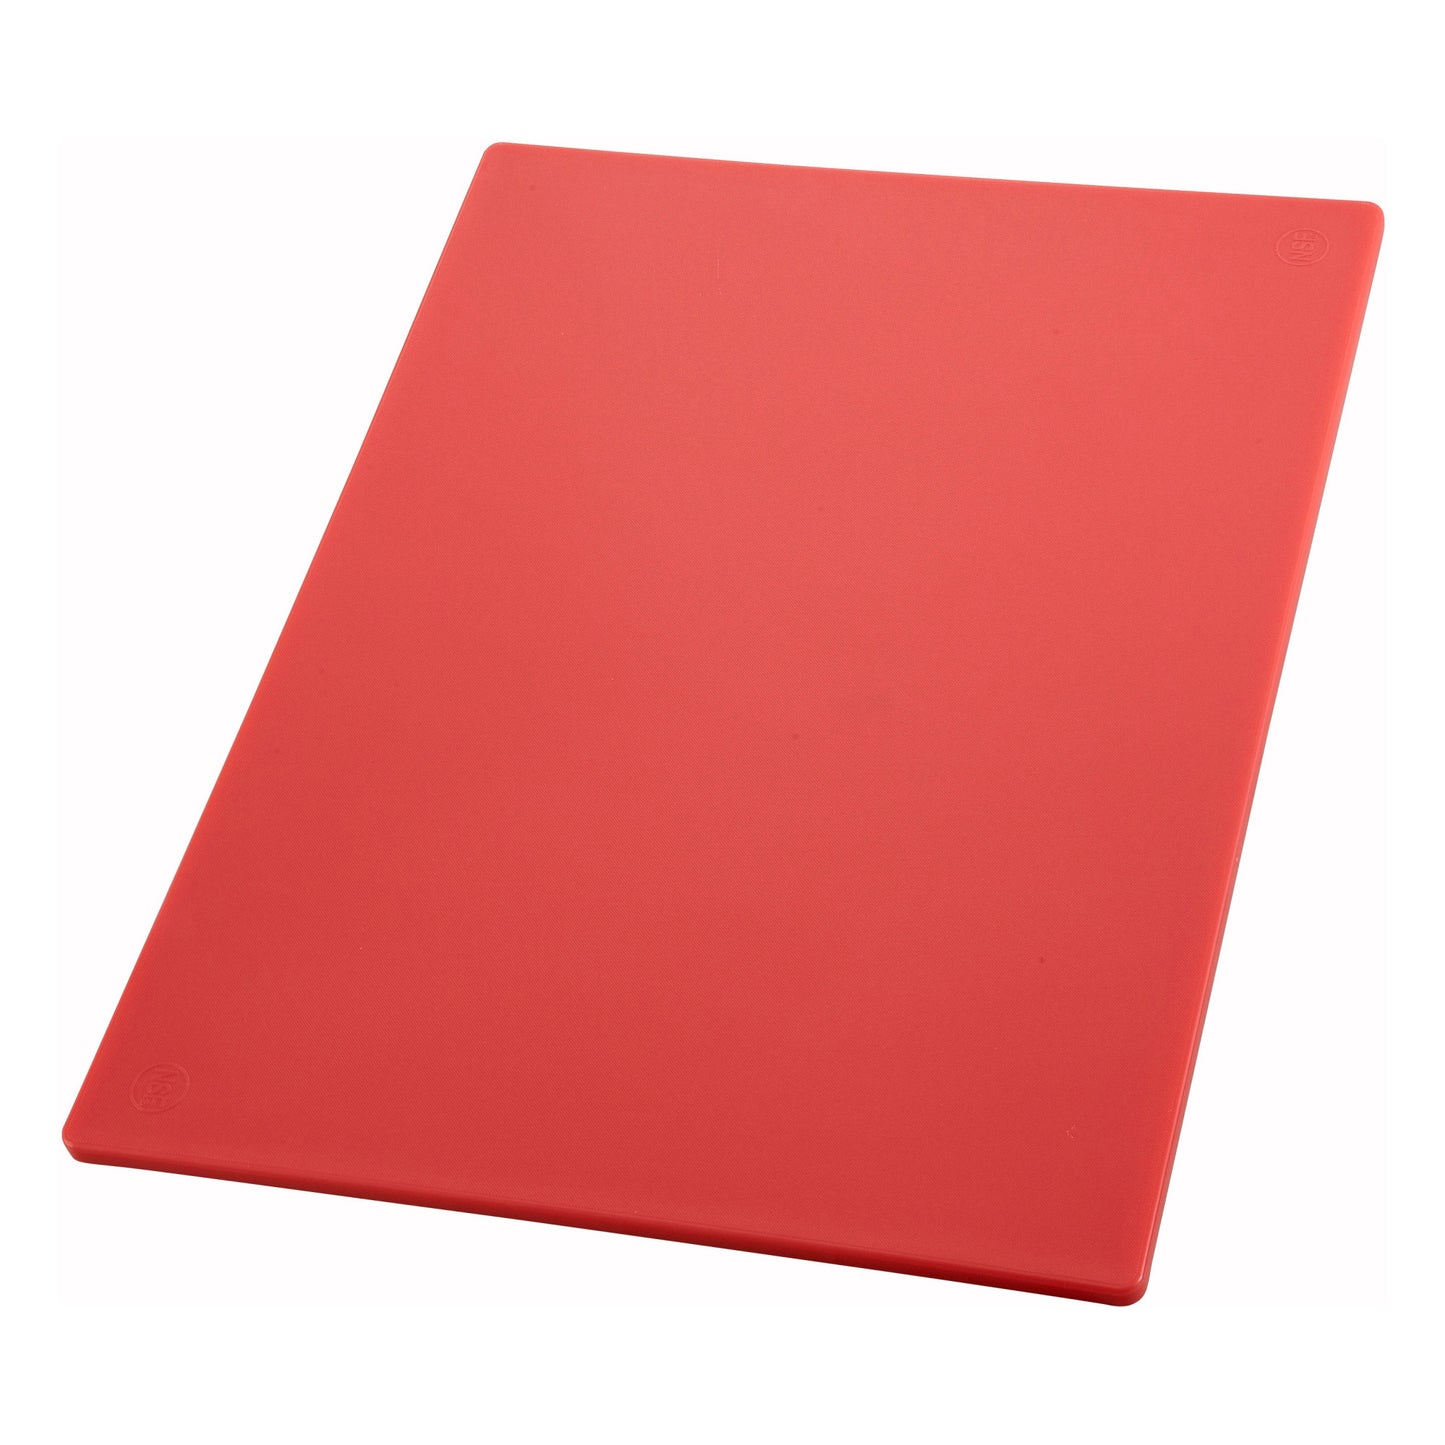 CBRD-1520 - HACCP Color-Coded Cutting Board - 15 x 20, Red